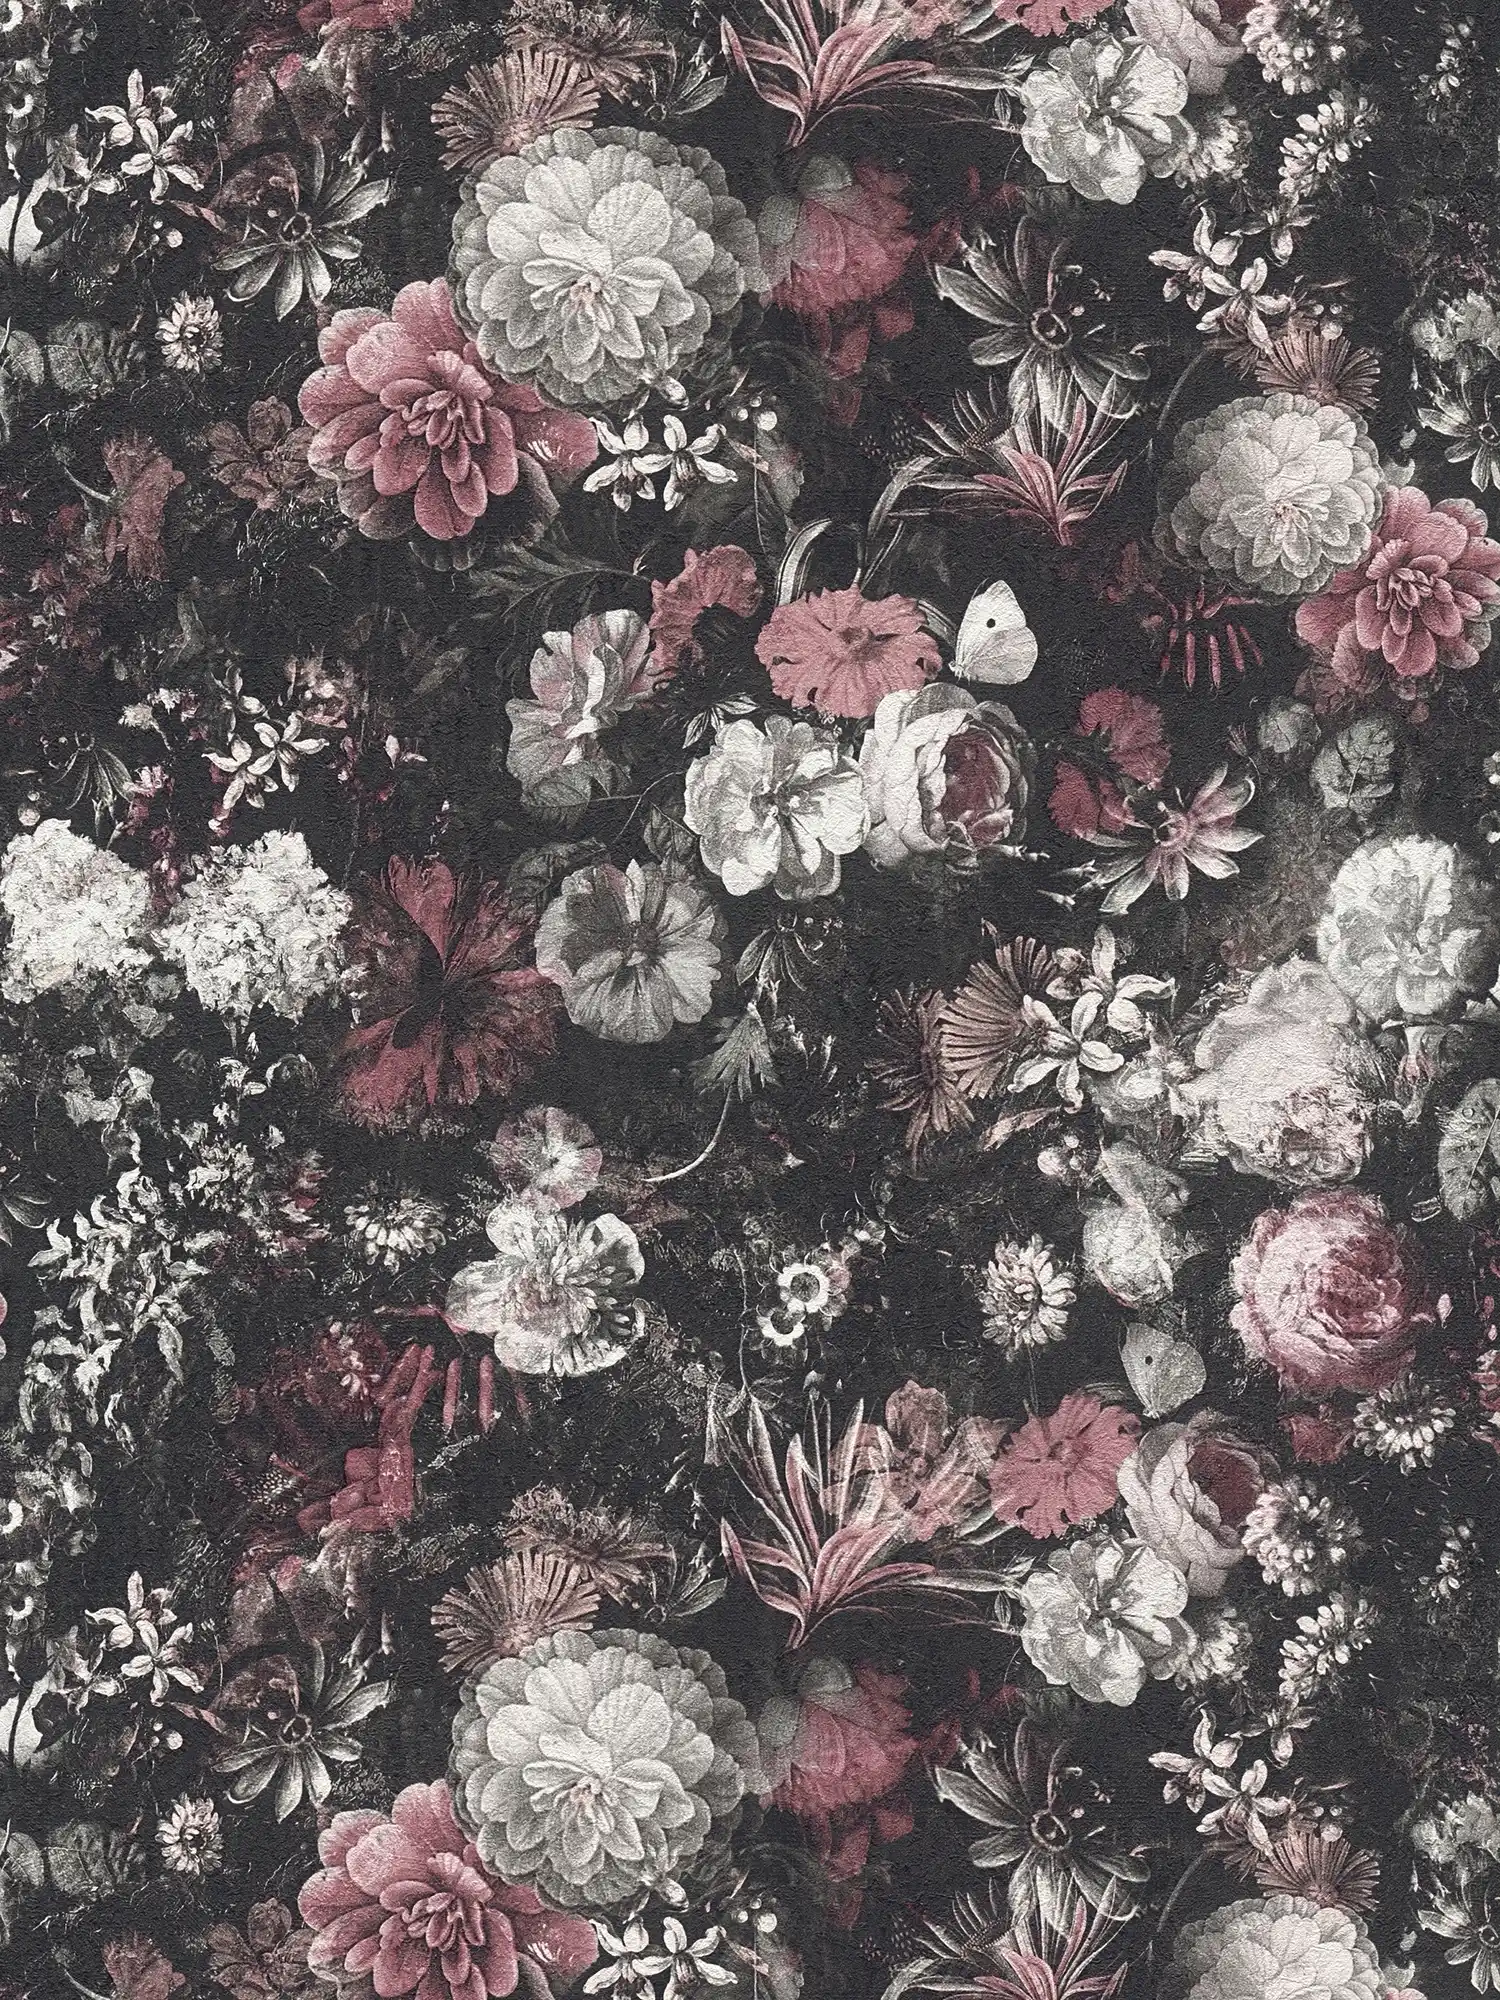         Vintage style floral wallpaper roses & flowers - red, black, white
    